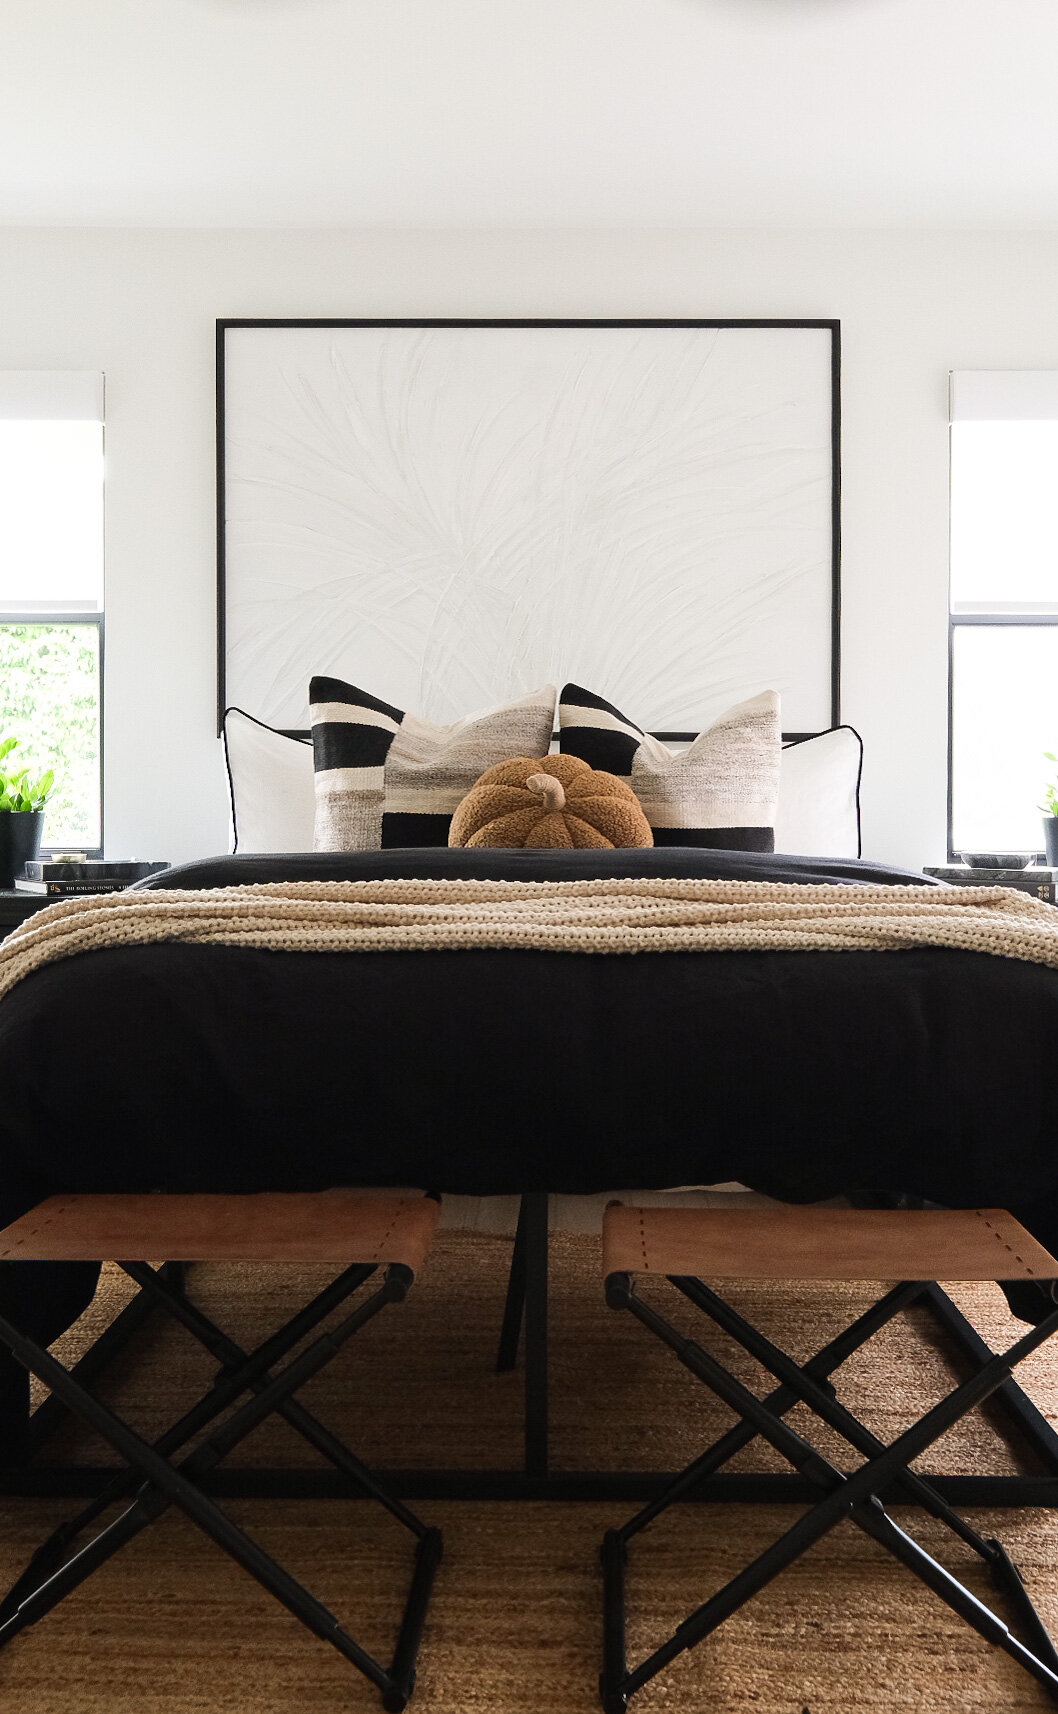 https://images.squarespace-cdn.com/content/v1/5449a23fe4b04f35b928c028/1630545993801-K3IGGL45SKQS82IIF70S/Fall+bedding+ideas.++Black+linen+duvet+cover%2C+Casaluna+bed+blanket%2C+black+and+ivory+pillows%2C+pumpkin+pillow%2C+and+white+shams.++Jute+rug+and+leather+ottomans+in+front+of+bed.